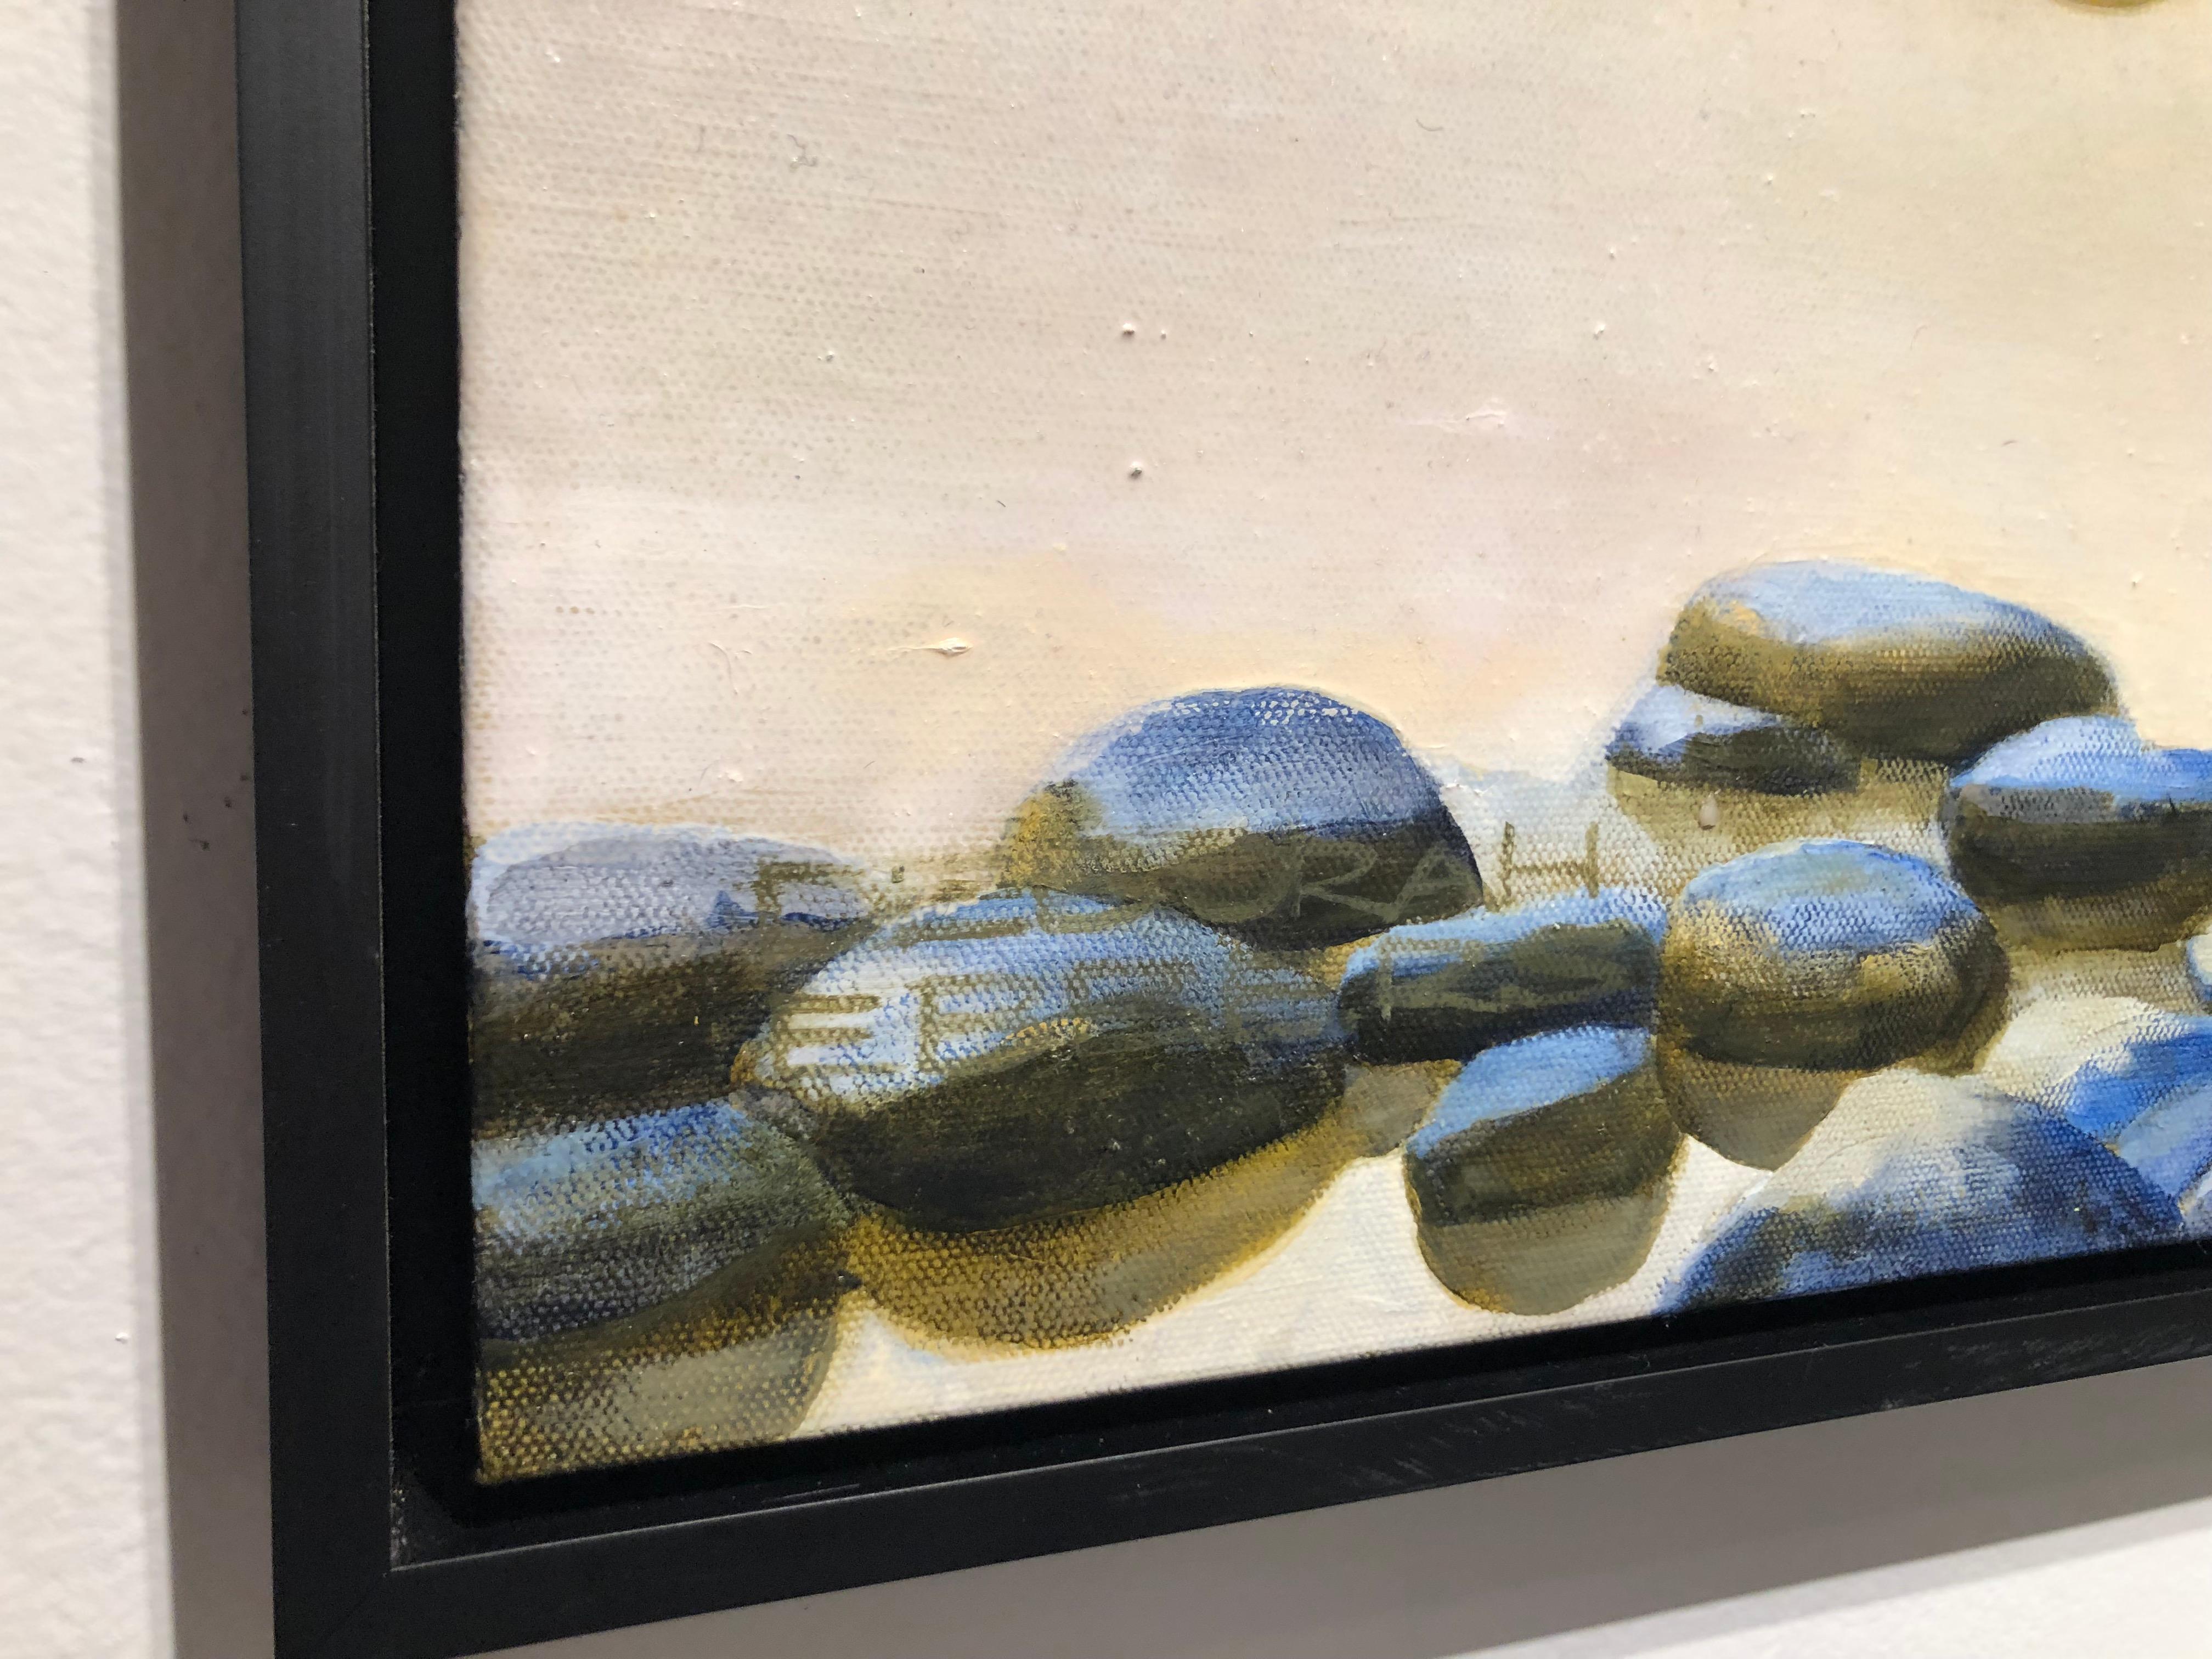 Song of Stones, Rocky Beach of Northern Michigan, Original Oil on Canvas 2